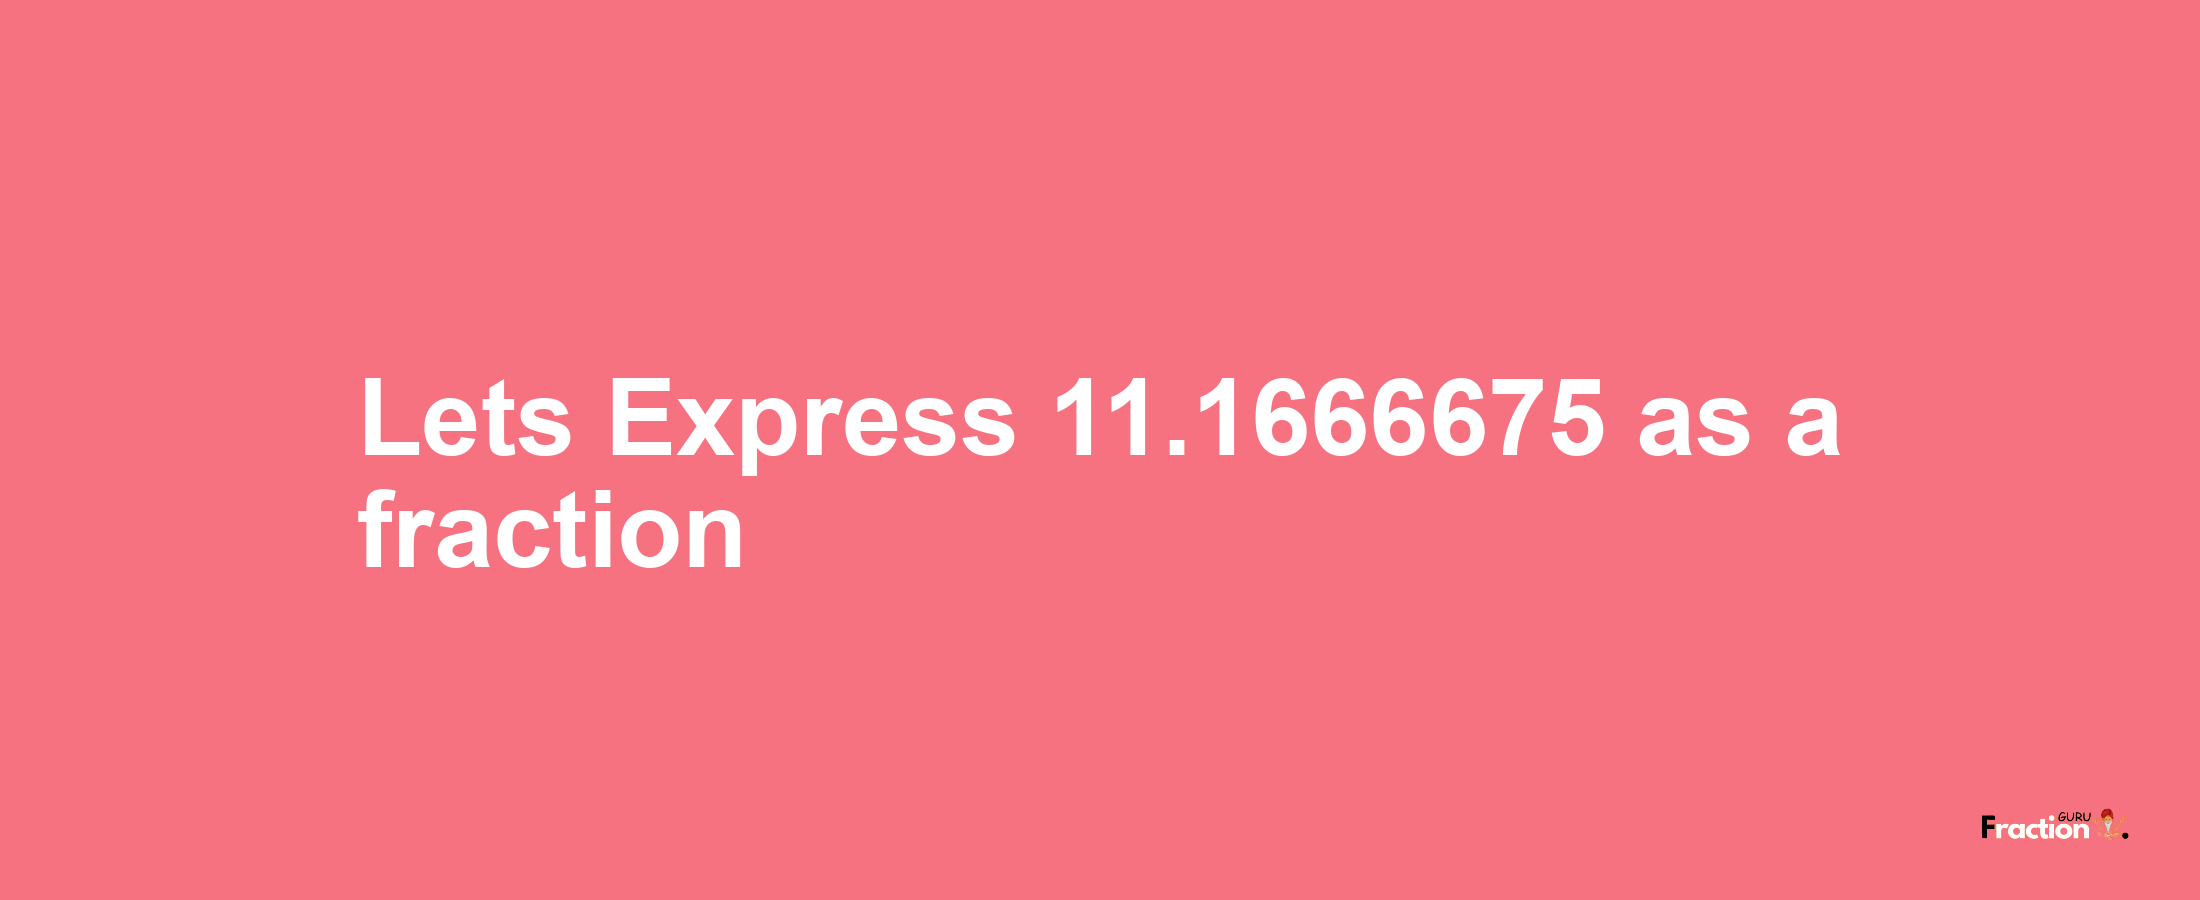 Lets Express 11.1666675 as afraction